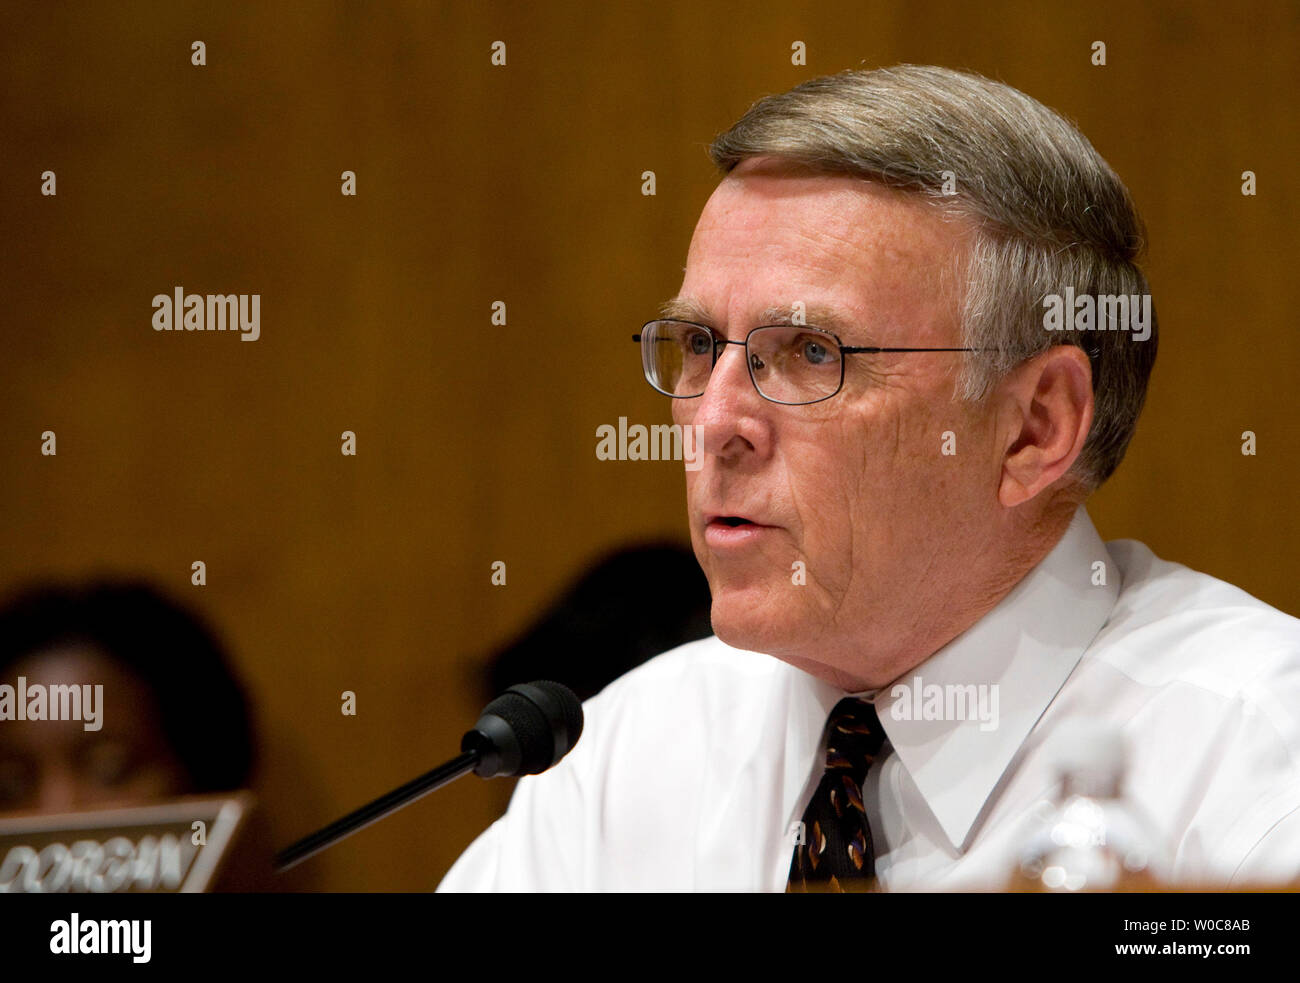 Sen. Byron Dorgan, D-ND, speaks during a Senate Democratic Policy Committee hearing on 'contractor misconduct and the electrocution deaths of American soldiers in Iraq' on Capitol Hill in Washington on July 11, 2008. (UPI Photo/Patrick D. McDermott) Stock Photo